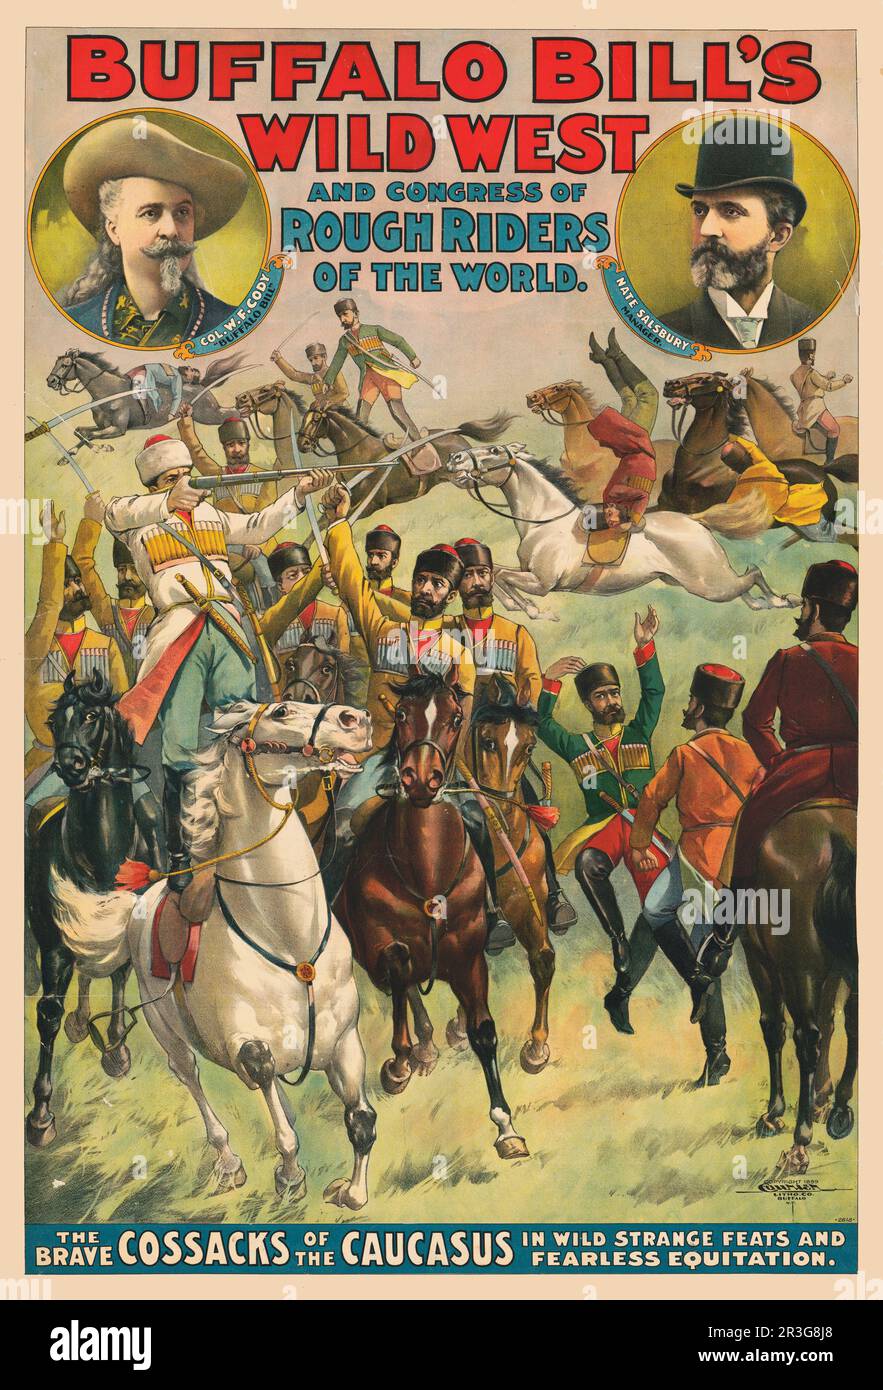 Vintage poster of Cossacks in battle on horseback, with portraits of Buffalo Bill and Nate Salsbury, circa 1899. Stock Photo